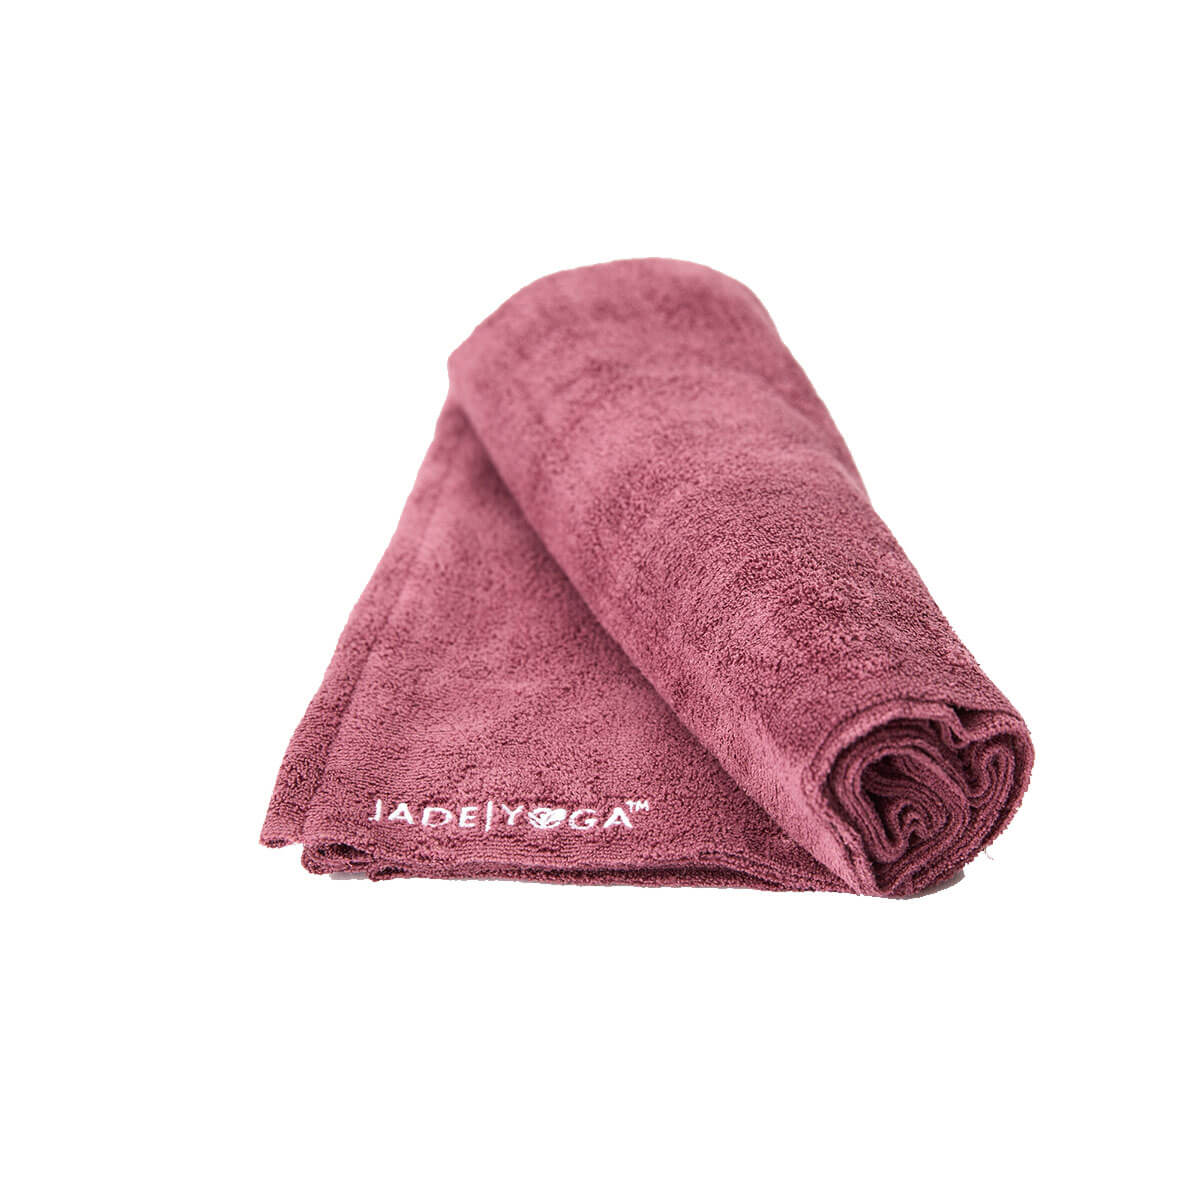 Best Yoga Towel Soft Lightweight And